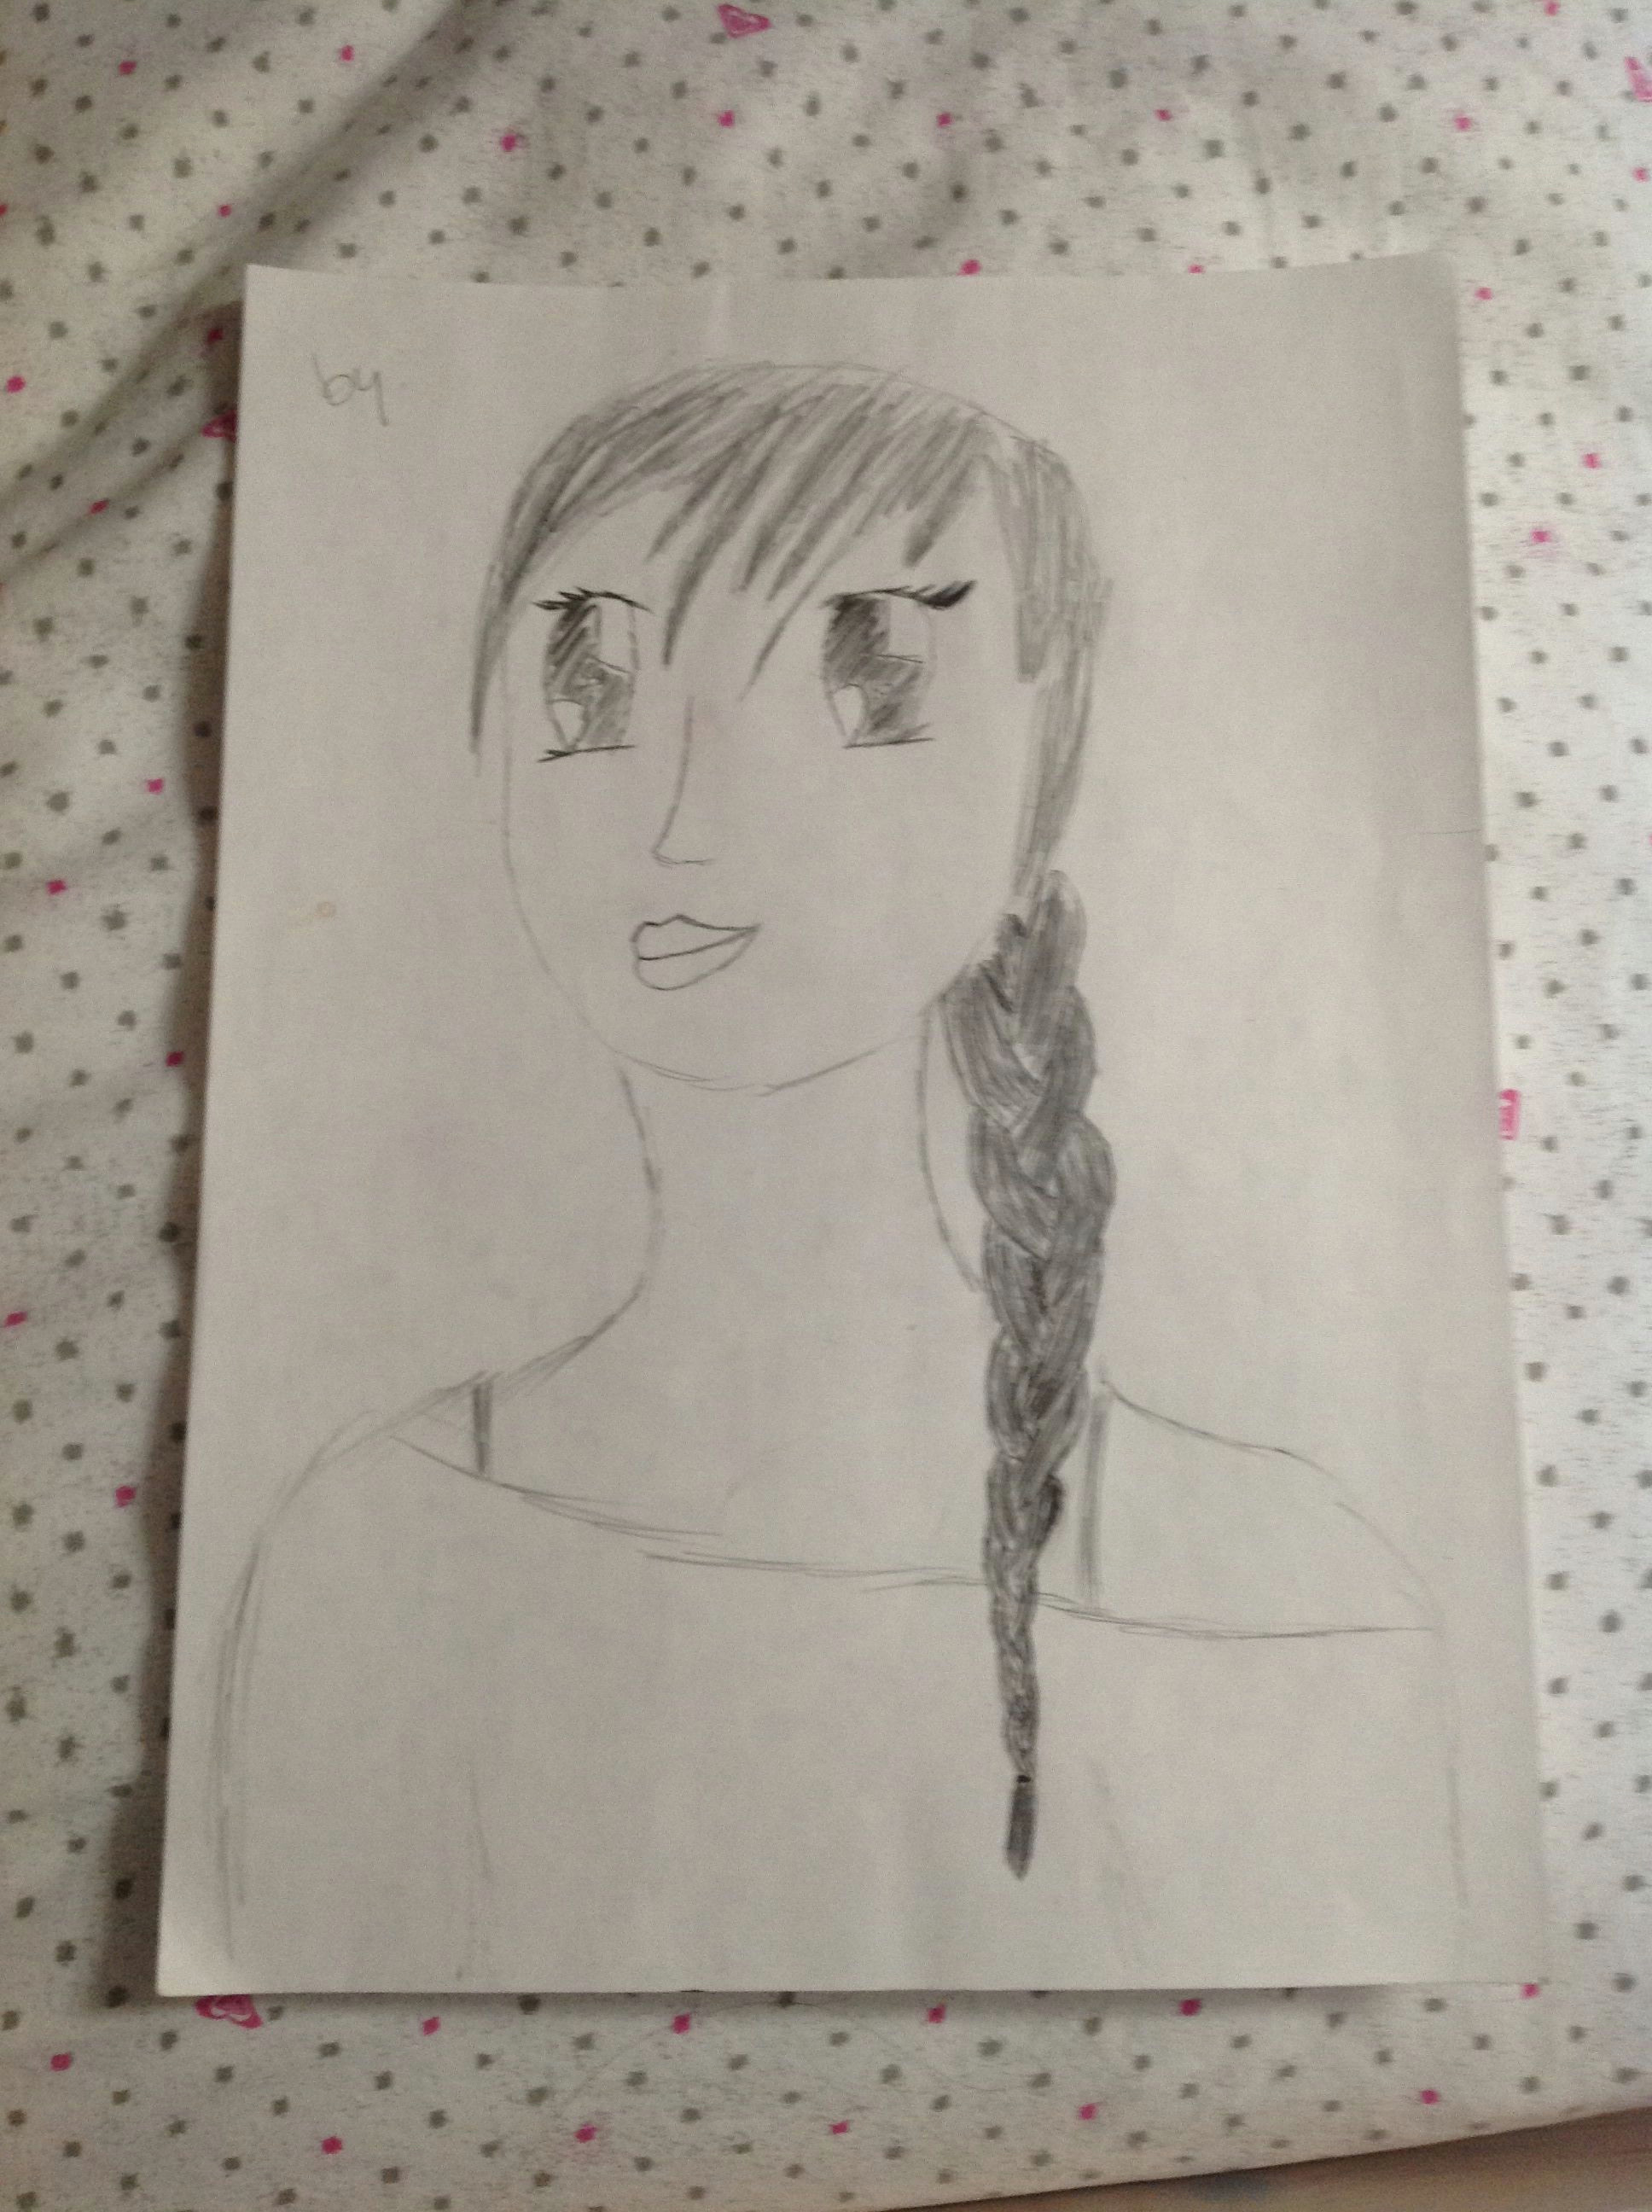 another girl i drew from my imagination imagination drawings art drawings fantasia